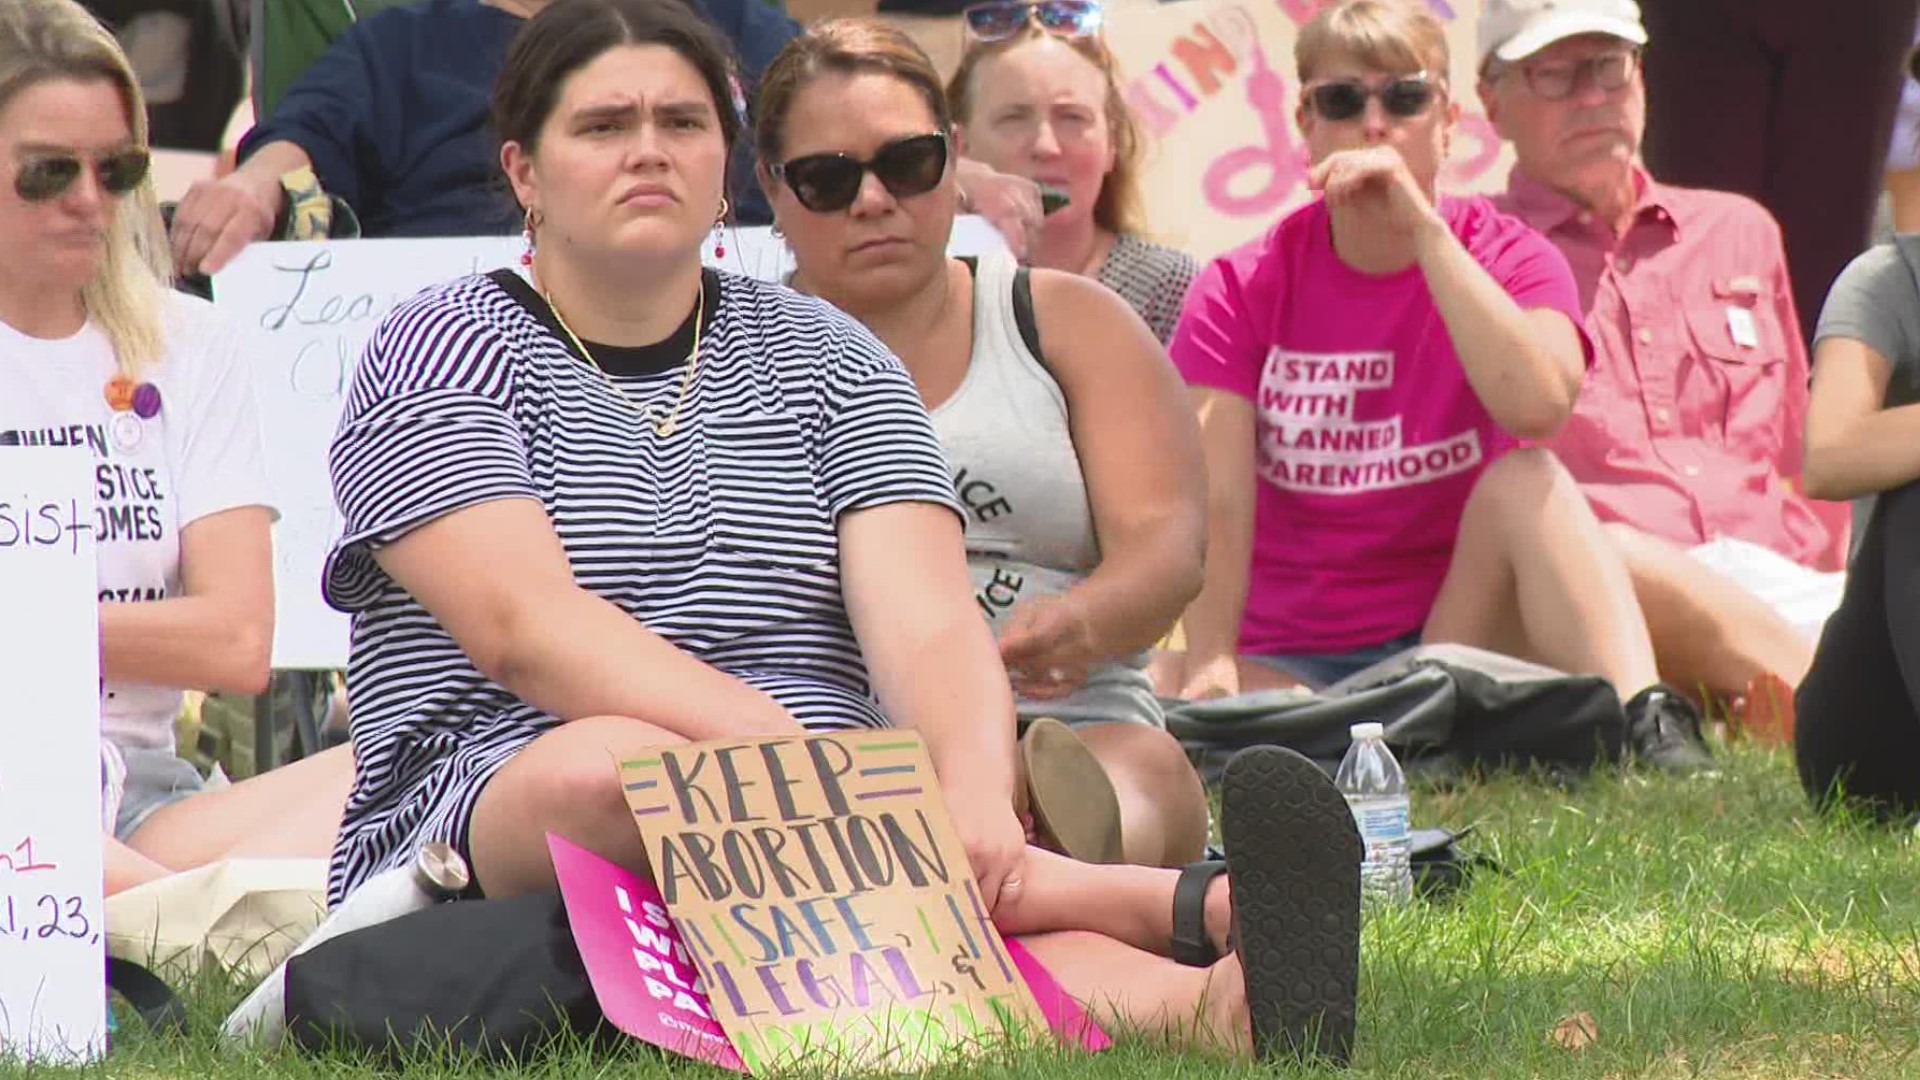 In Indianapolis on Saturday, hundreds of people gathered downtown at Military Park for a "Bans off Block Party" in support of keeping abortion legal in Indiana.